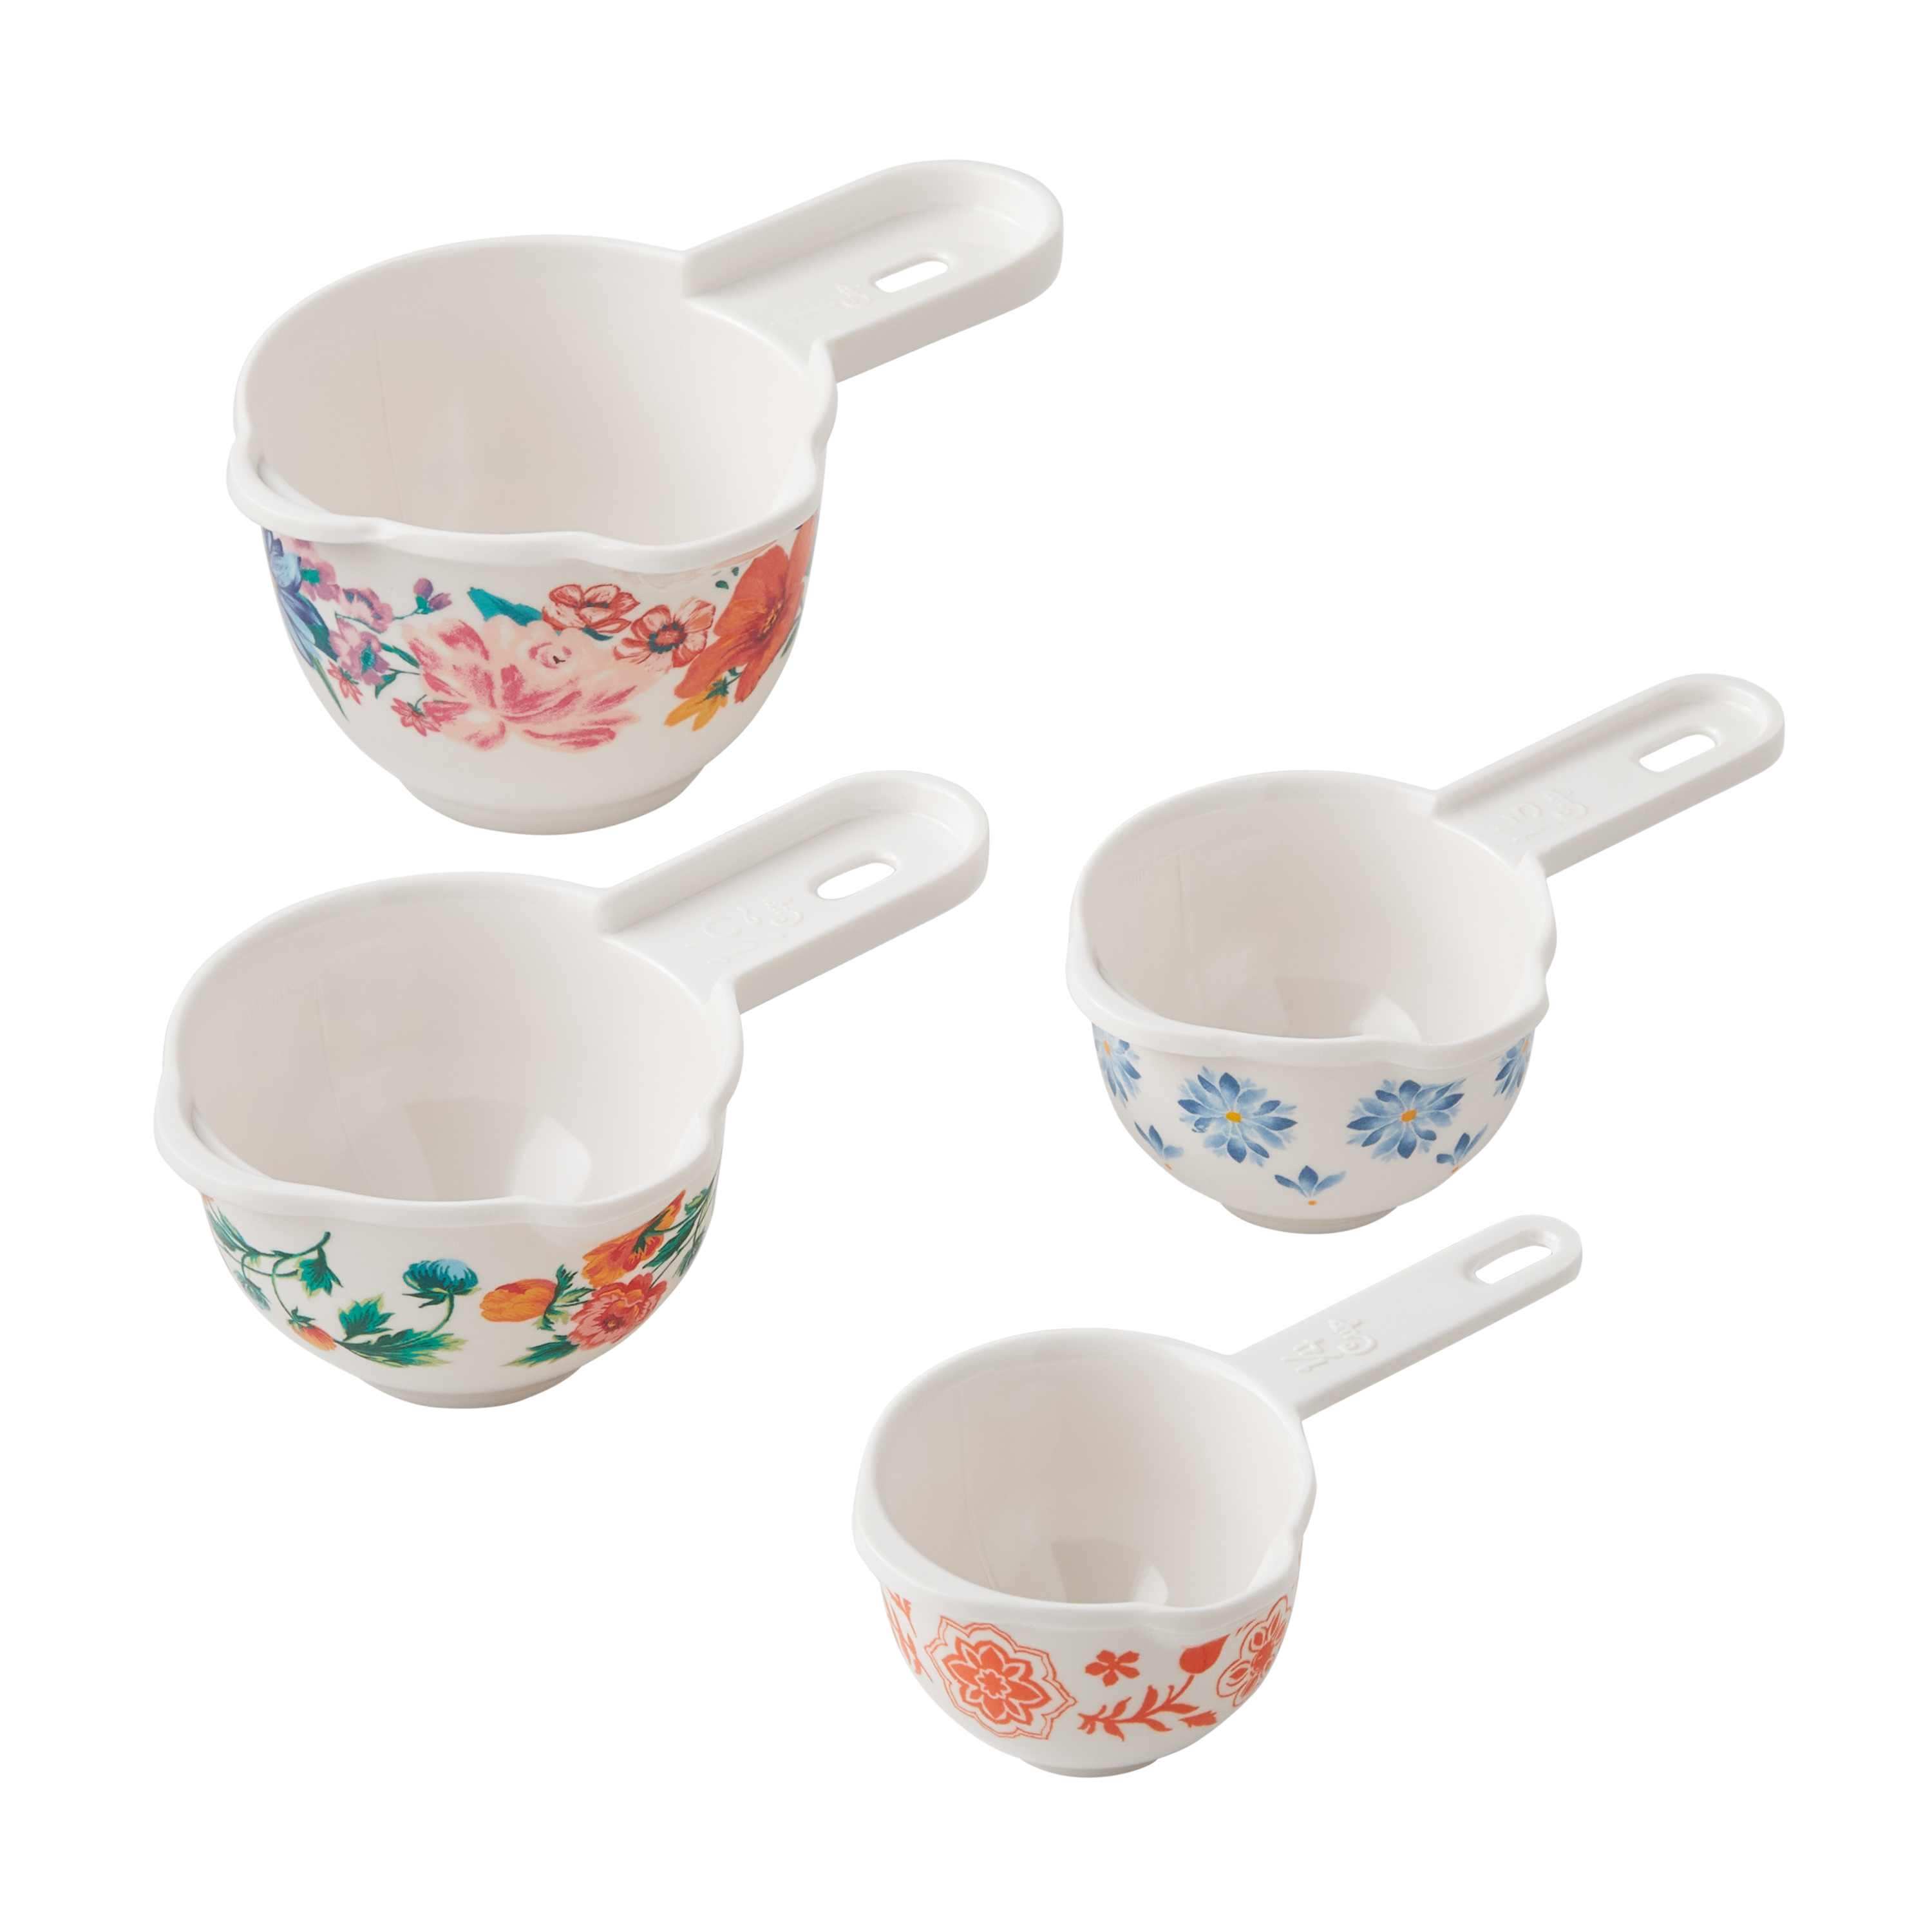 The Pioneer Woman Brilliant Blooms 20-Piece Blue Bake & Prep Set with Baking Dish & Measuring Cups - image 5 of 13